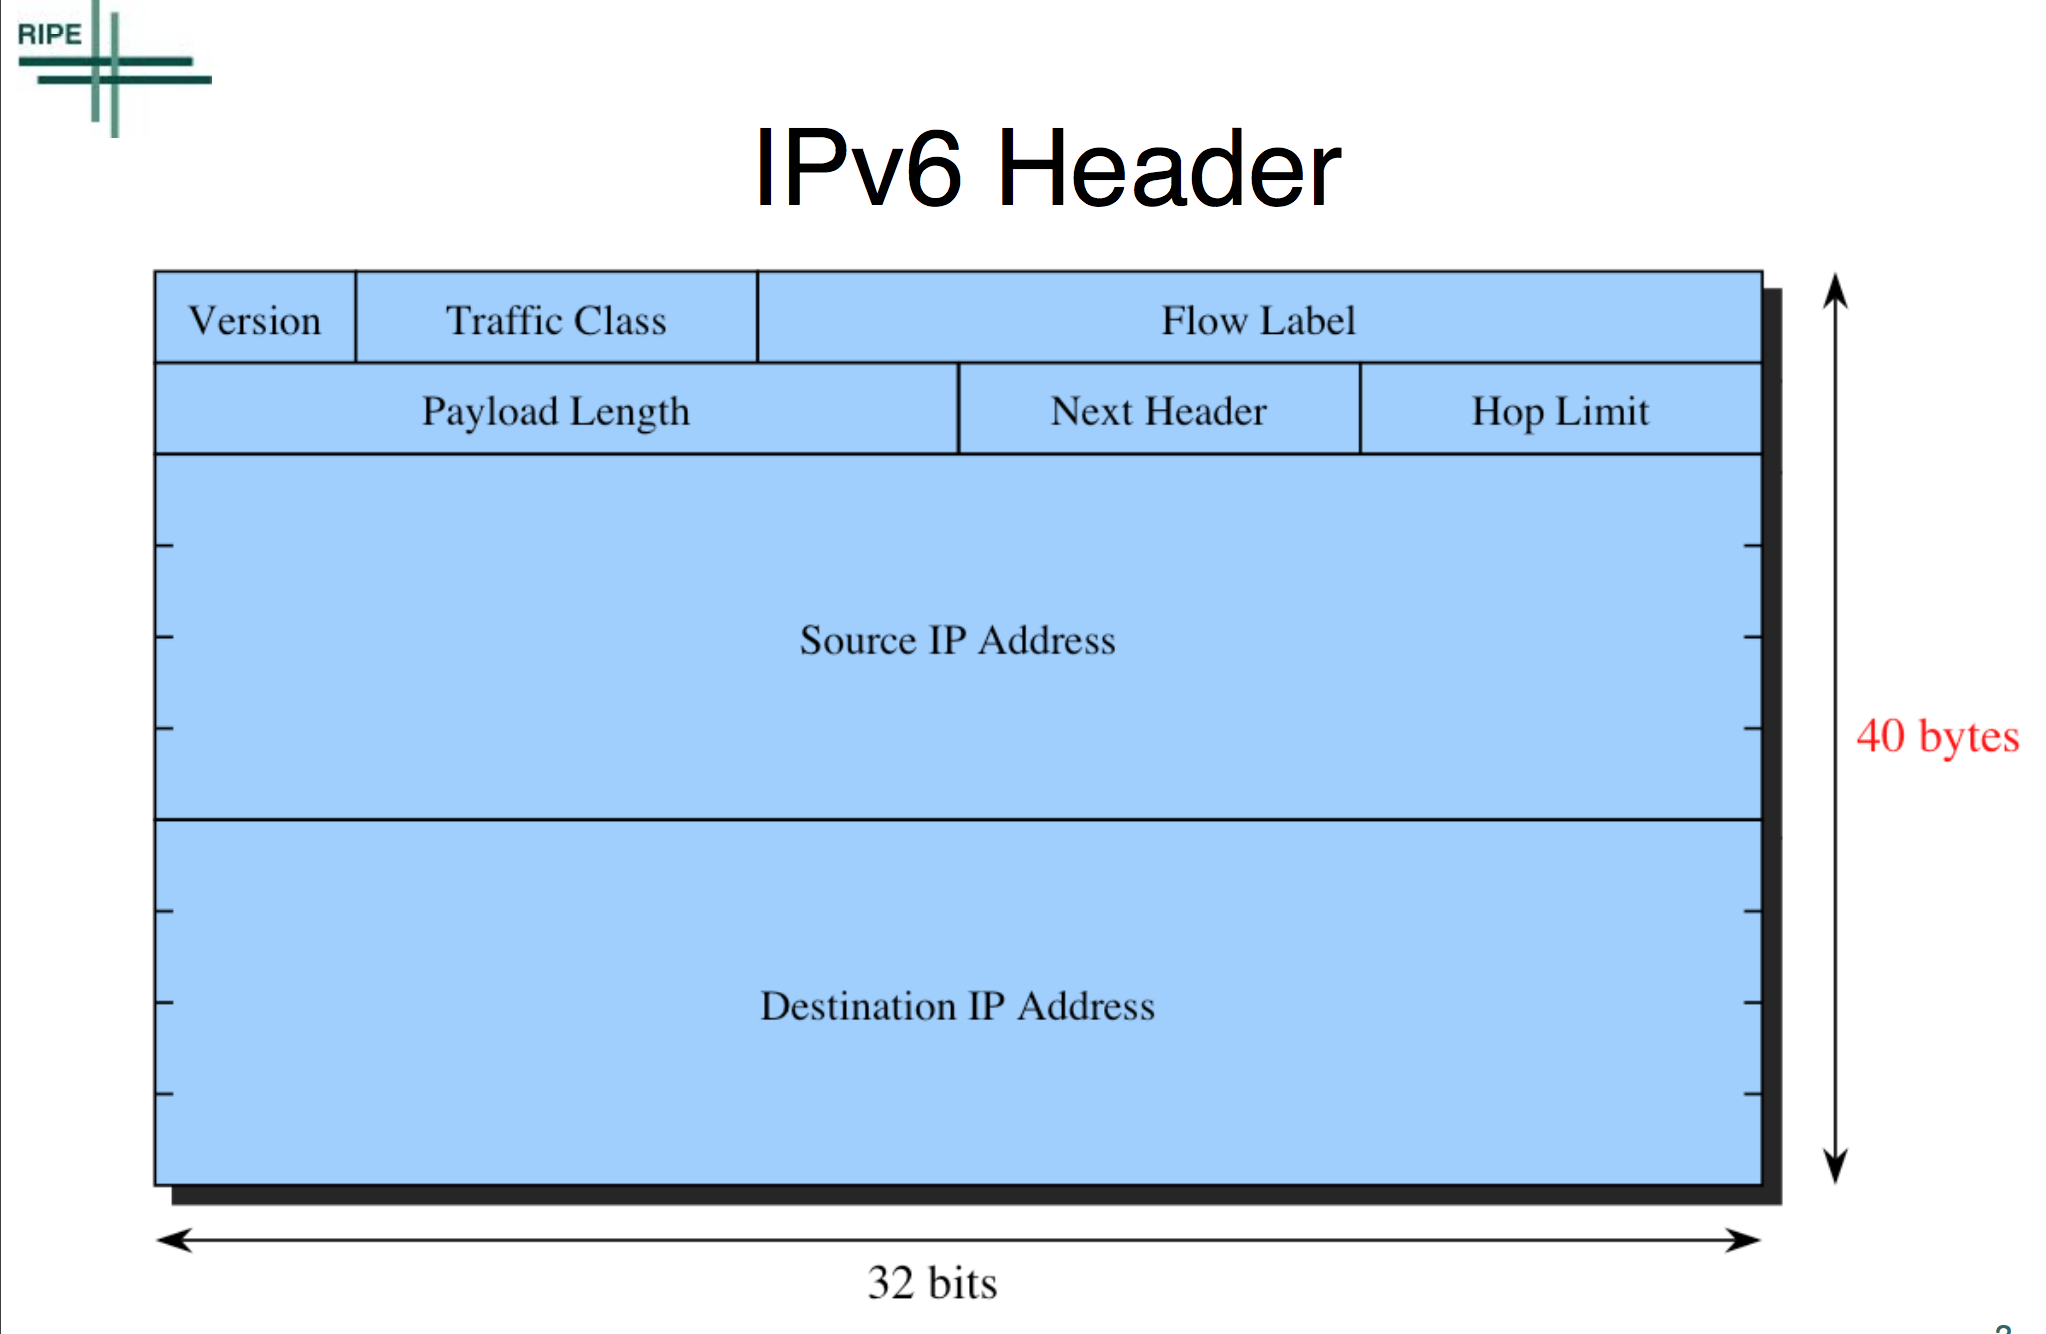 A Brief Comparison of IPv4 and IPv6